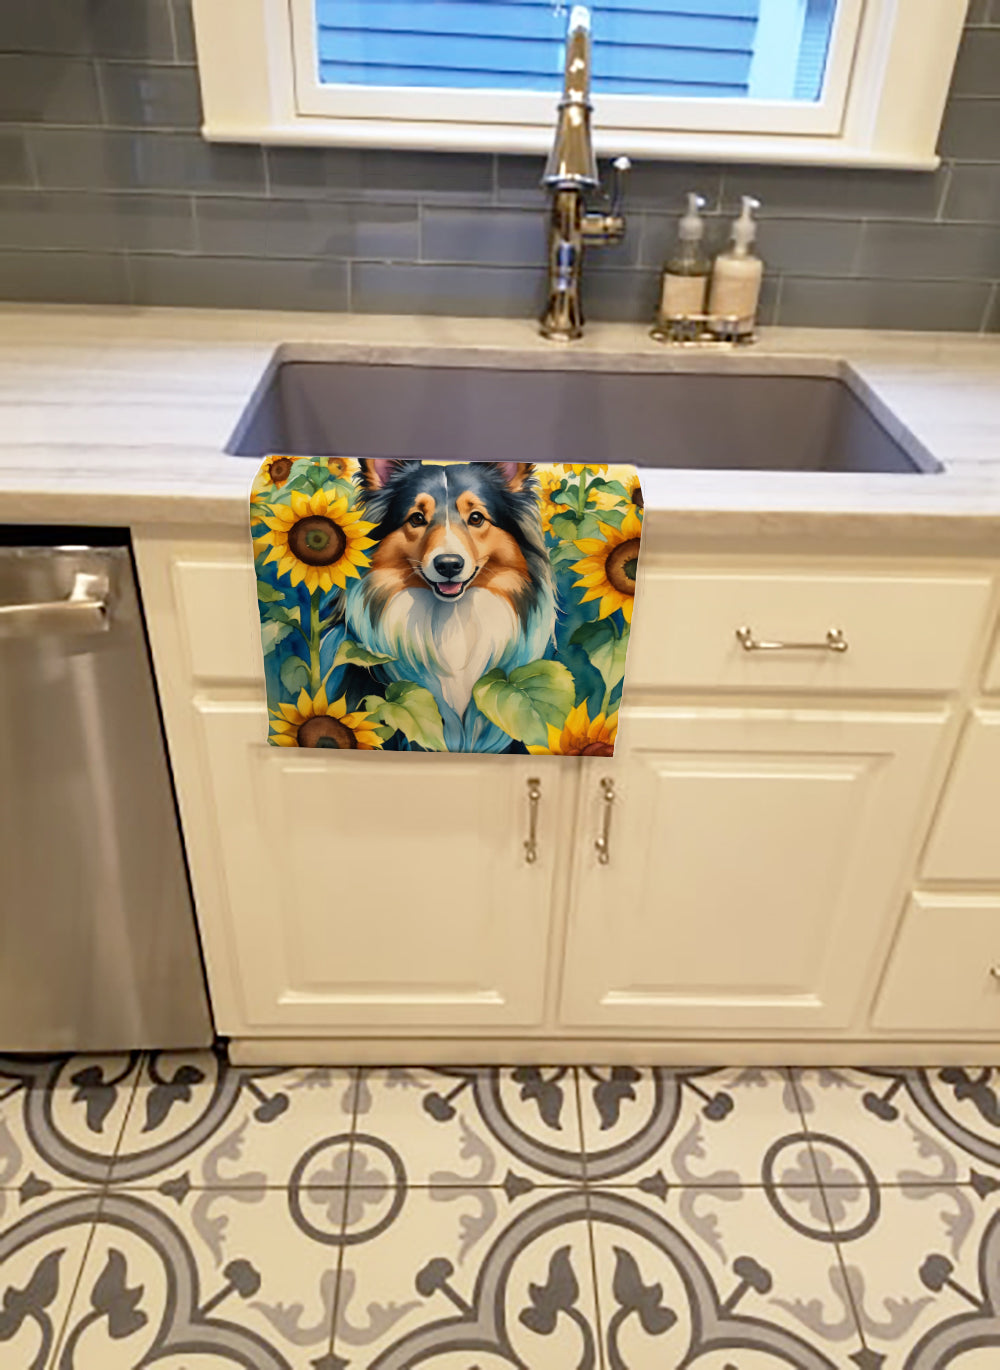 Buy this Sheltie in Sunflowers Kitchen Towel